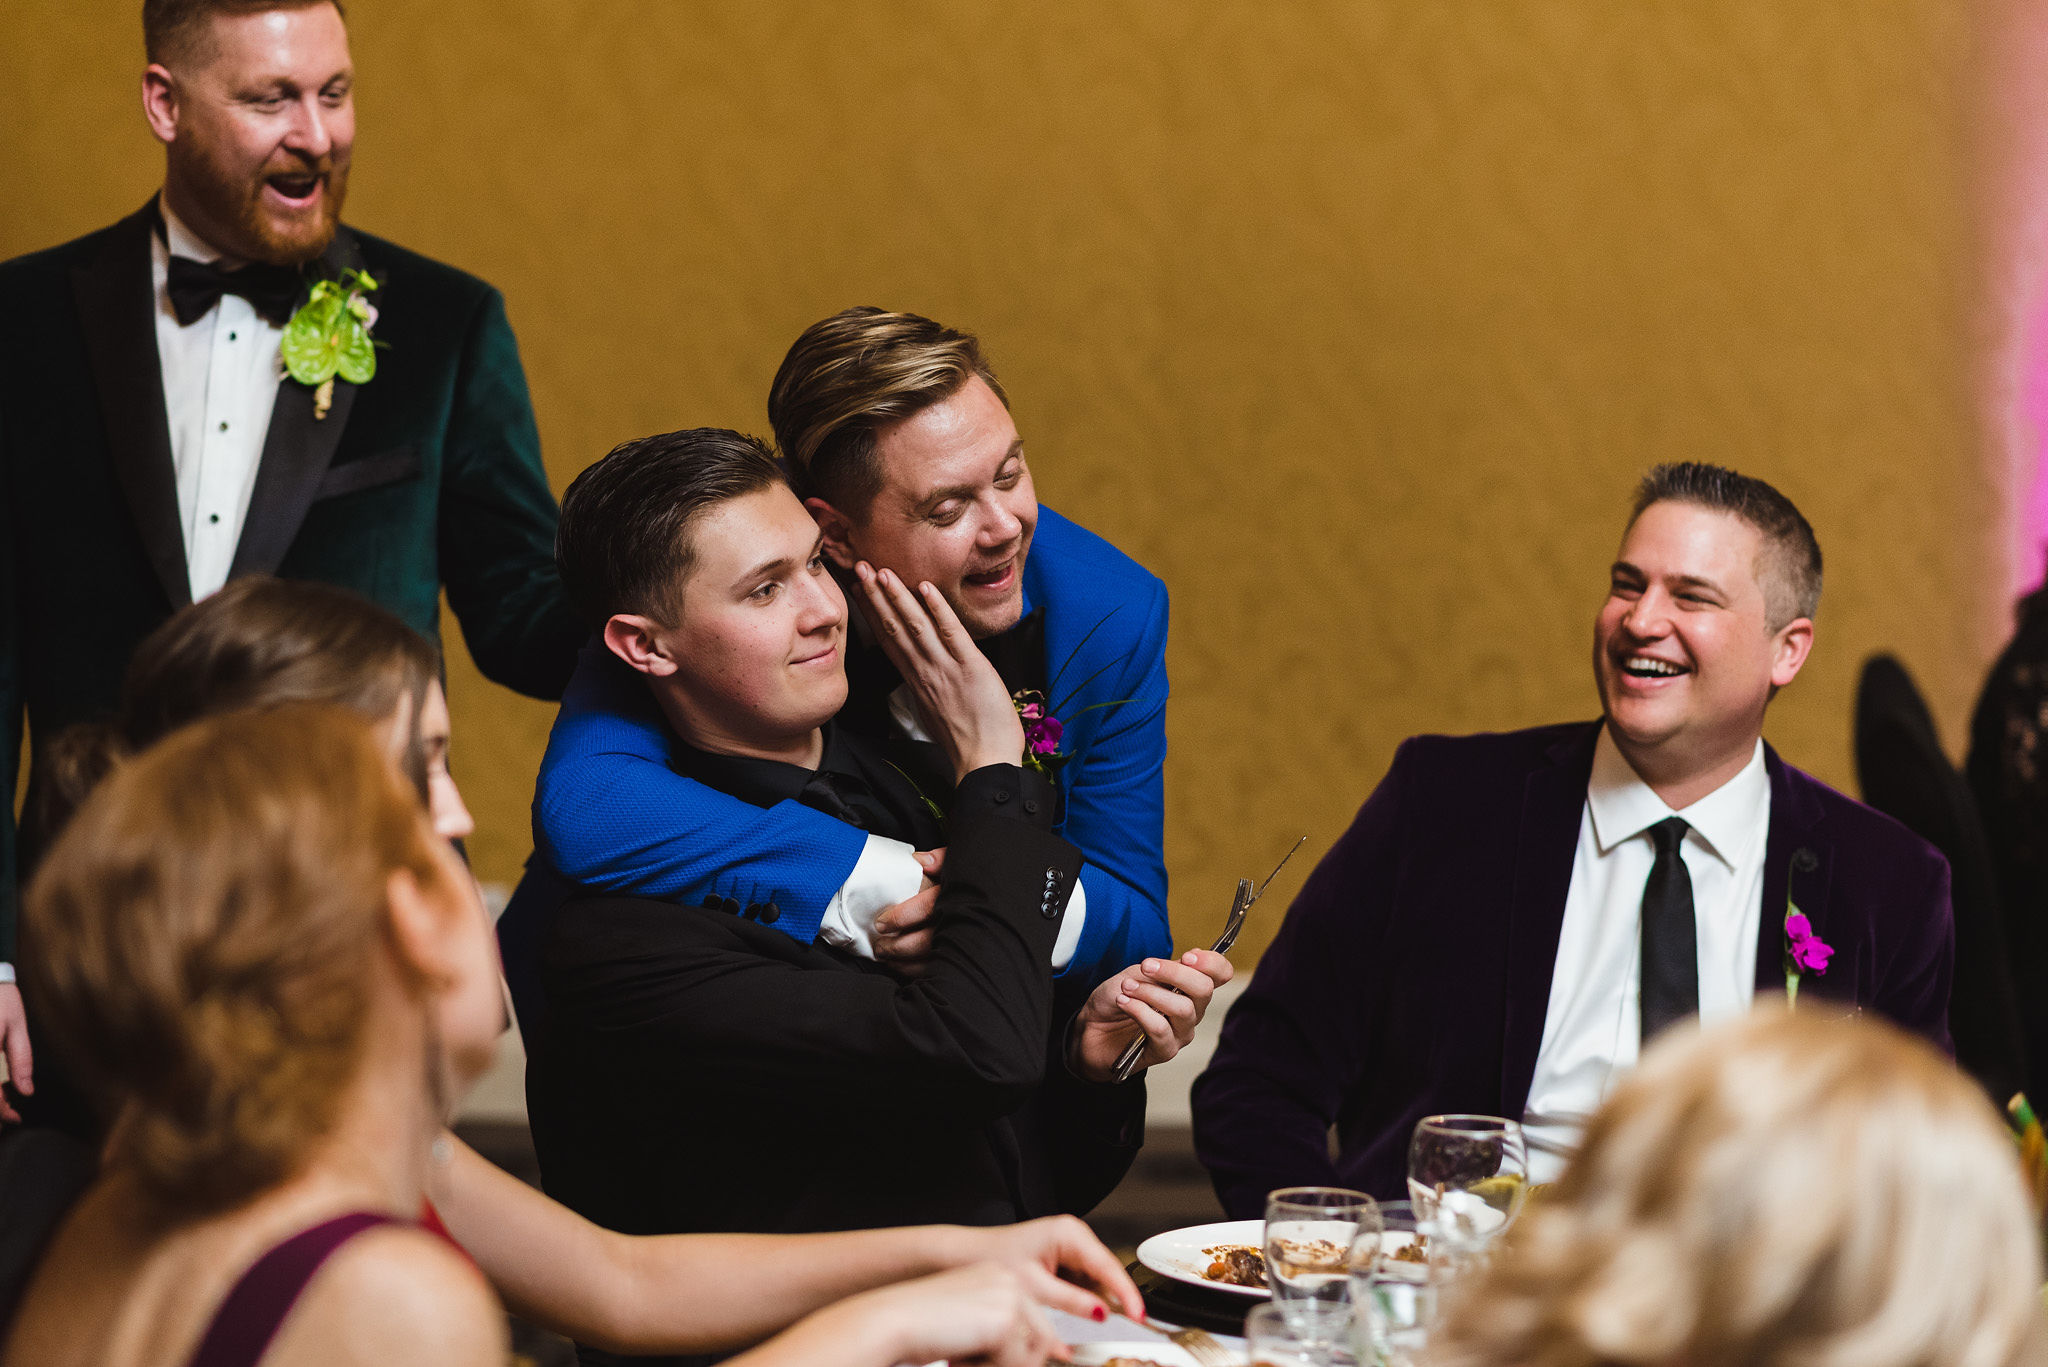 groom wrapping his arms around a wedding guest seated at a table with the other guests laughing during the reception at the Hilton Fallsview in Niagara Falls